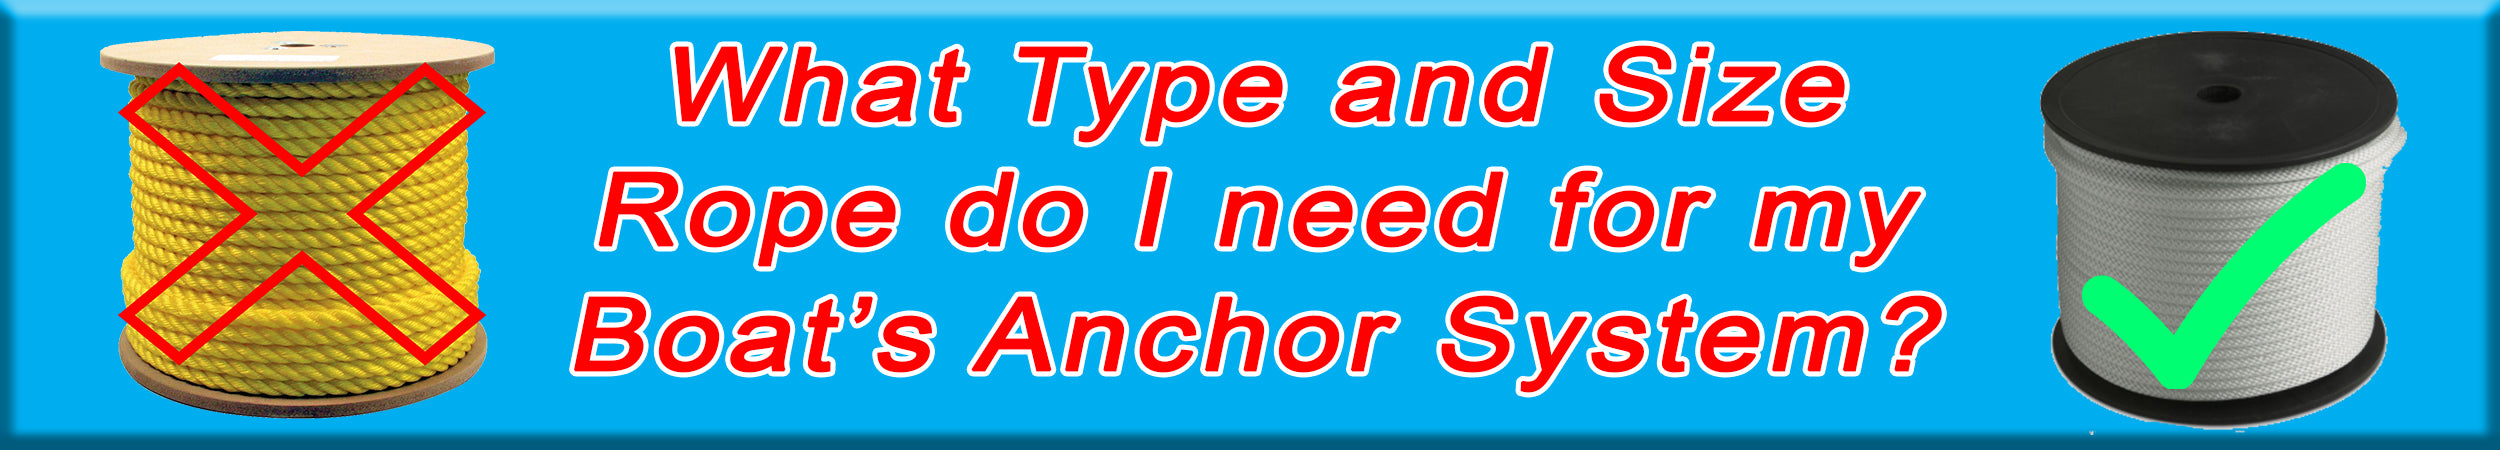 Choosing the right size and type of anchor rope for your boat